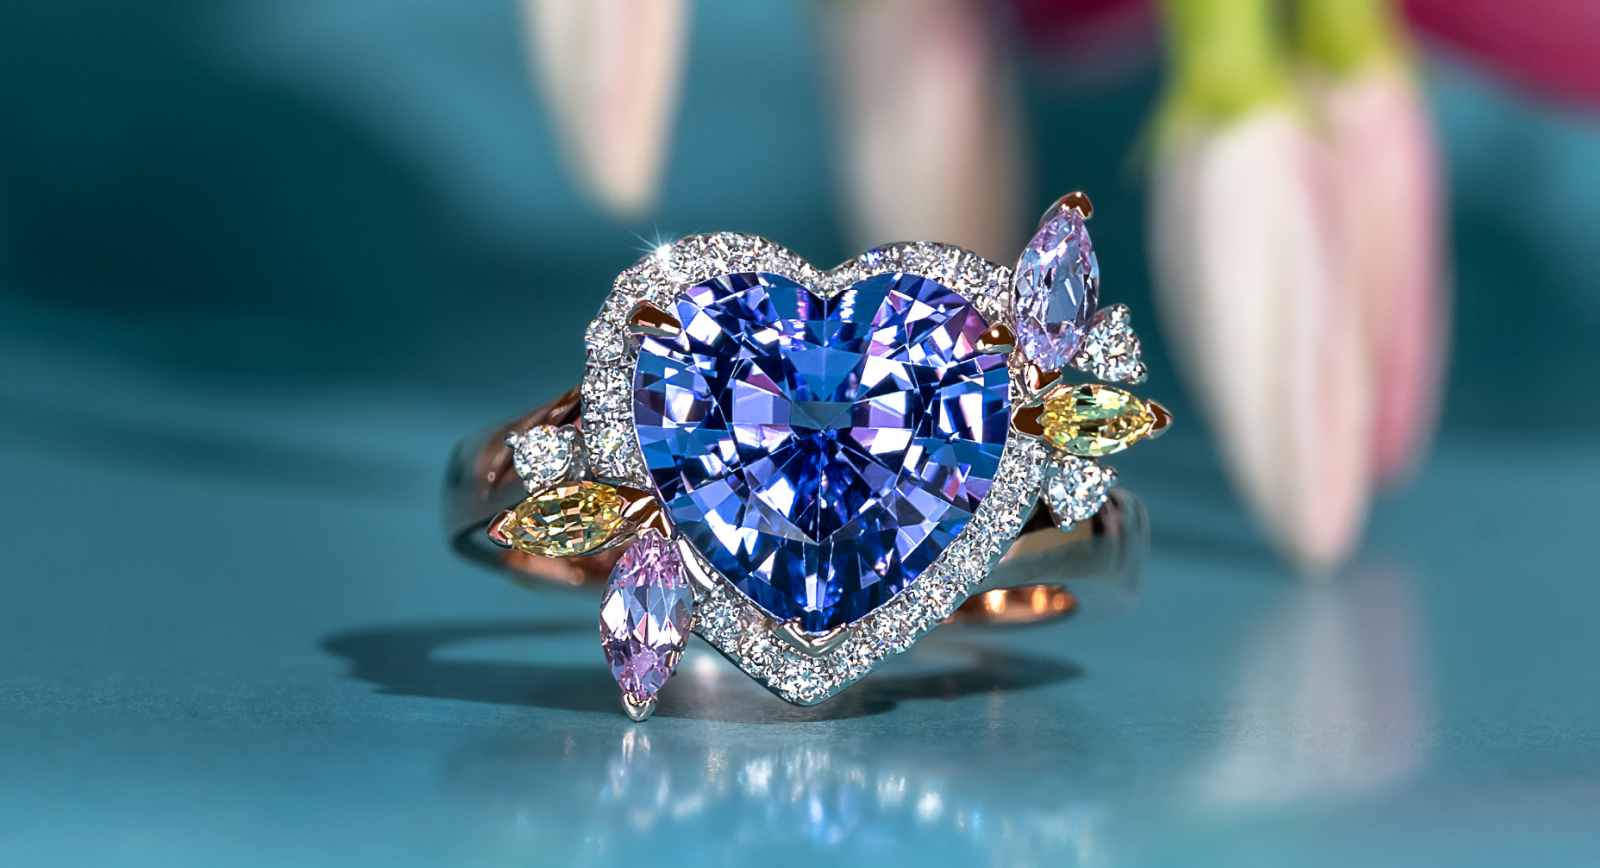 Heart-shaped gemstone ring by Singapore-based bespoke jewellery brand Madly, founded by Maddy Barber